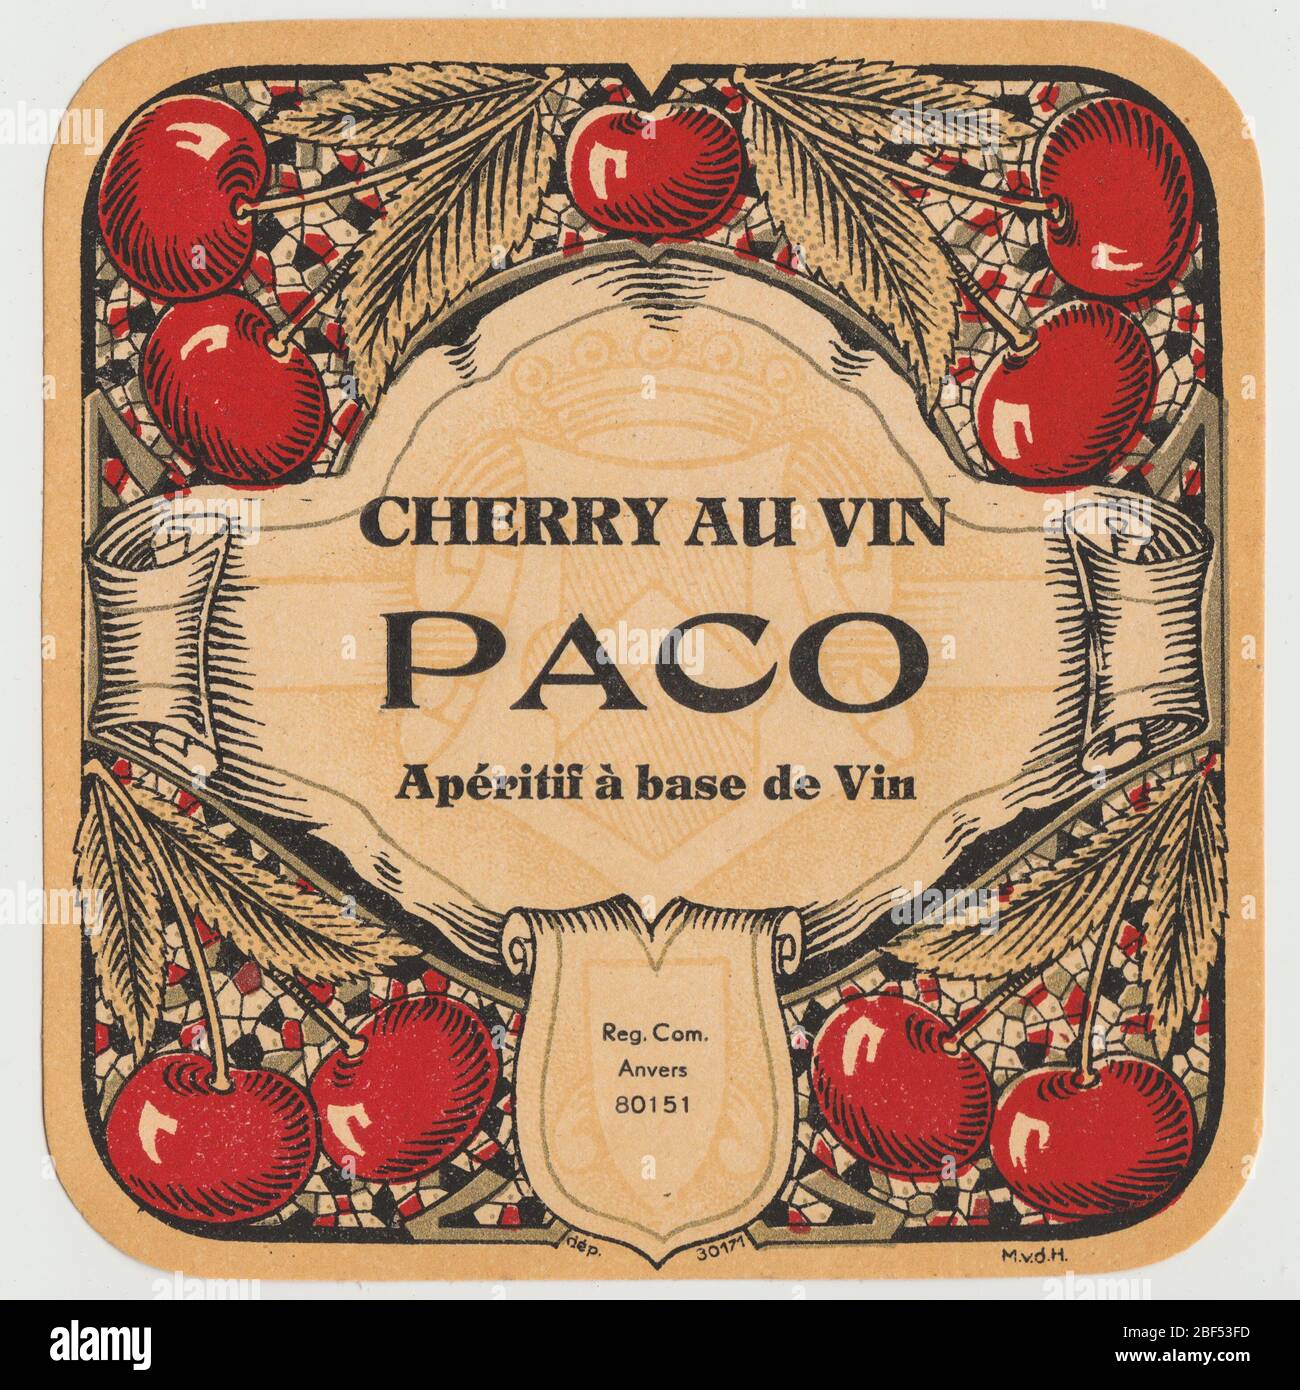 Unused and rare vintage label of a Cherry Brandy liquor, this label is decorated with red cherries. Brandy is a spirit produced by distilling wine. Br Stock Photo